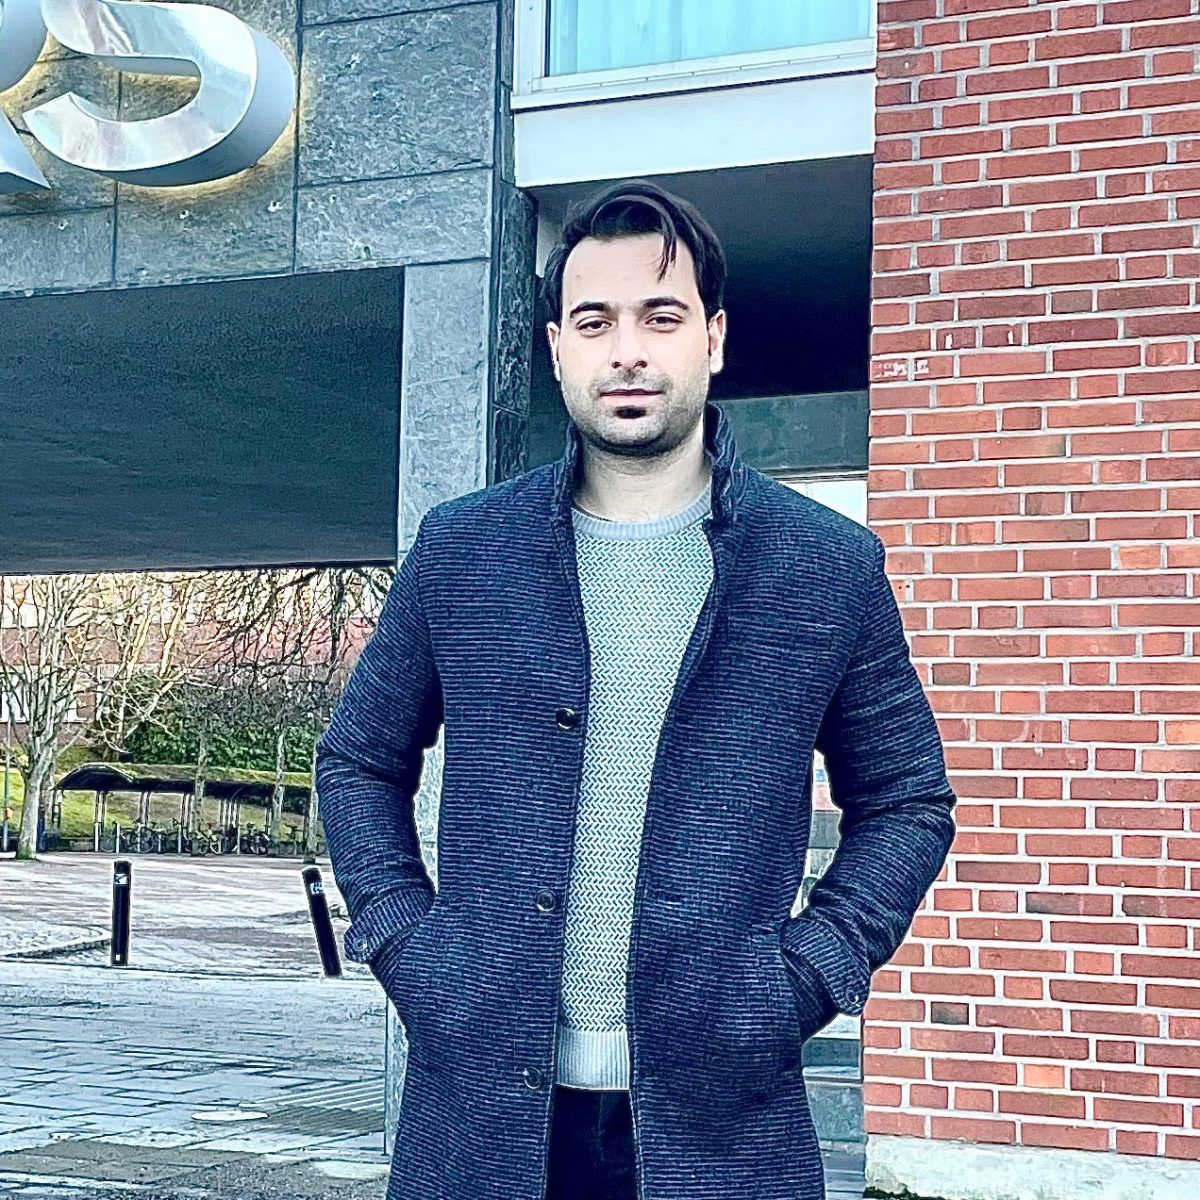 Photo of Munis Khan standing in front of a building.